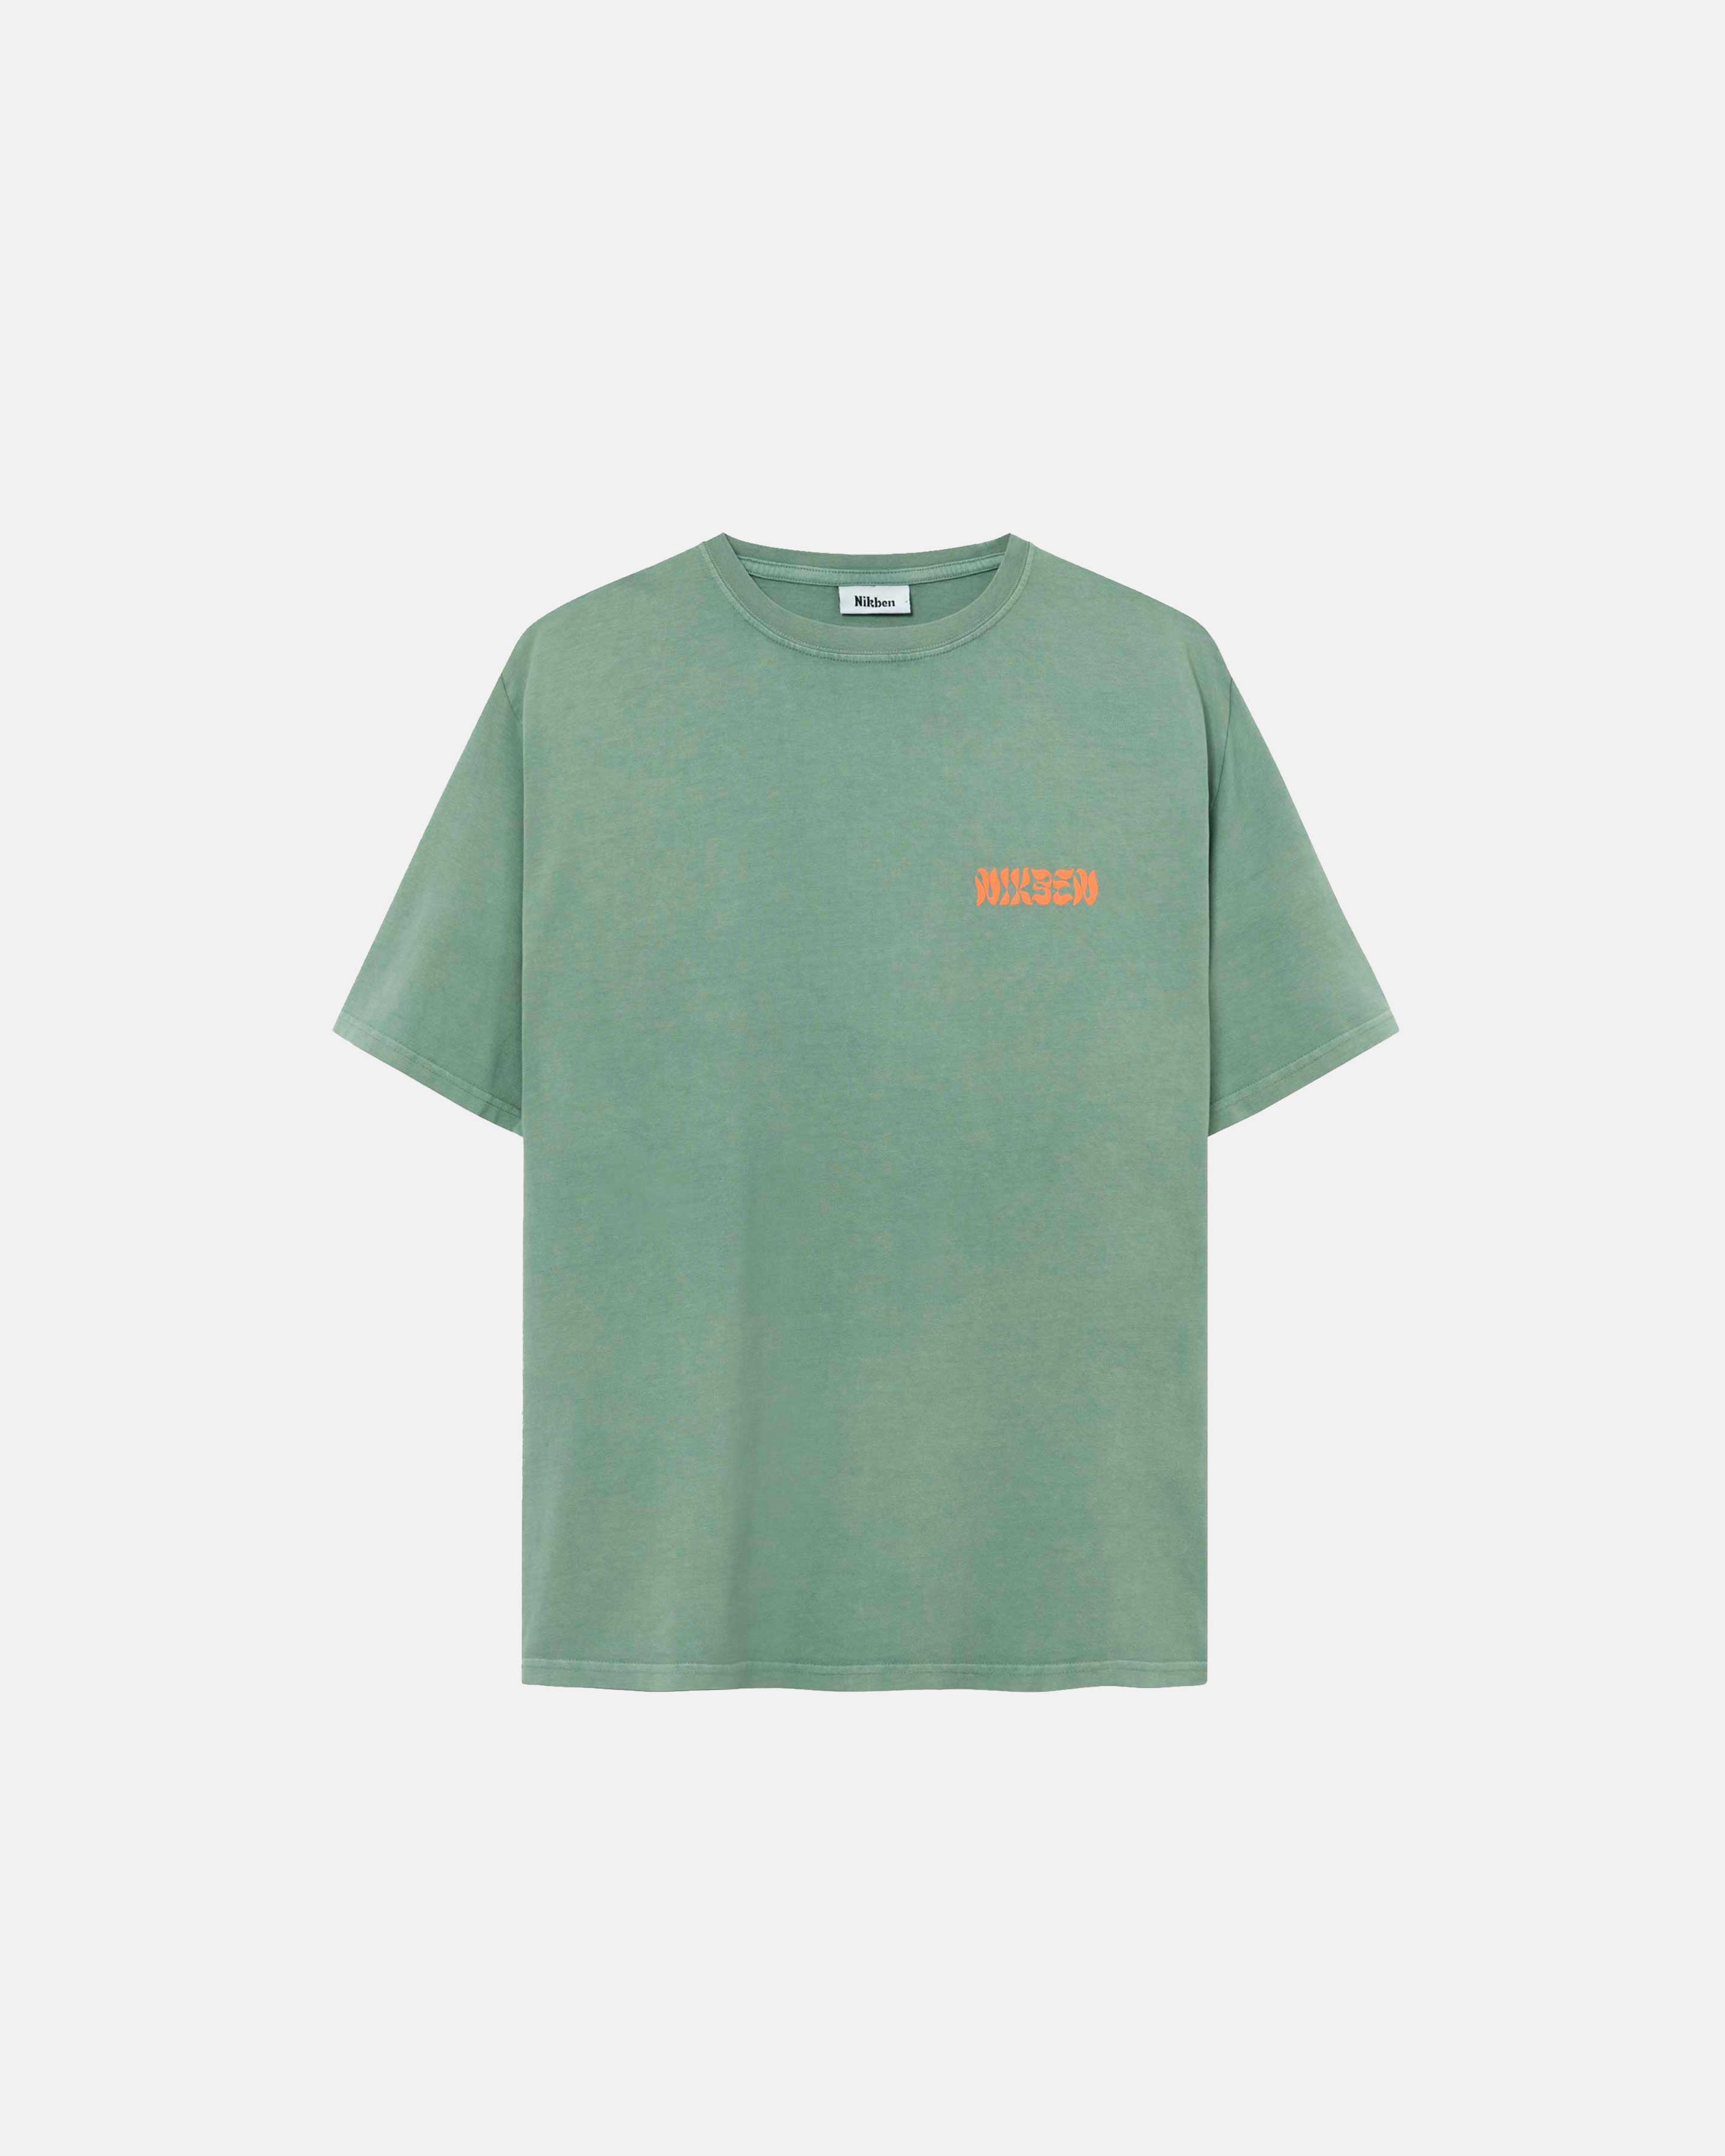 Green t-shirt with orange puffy 